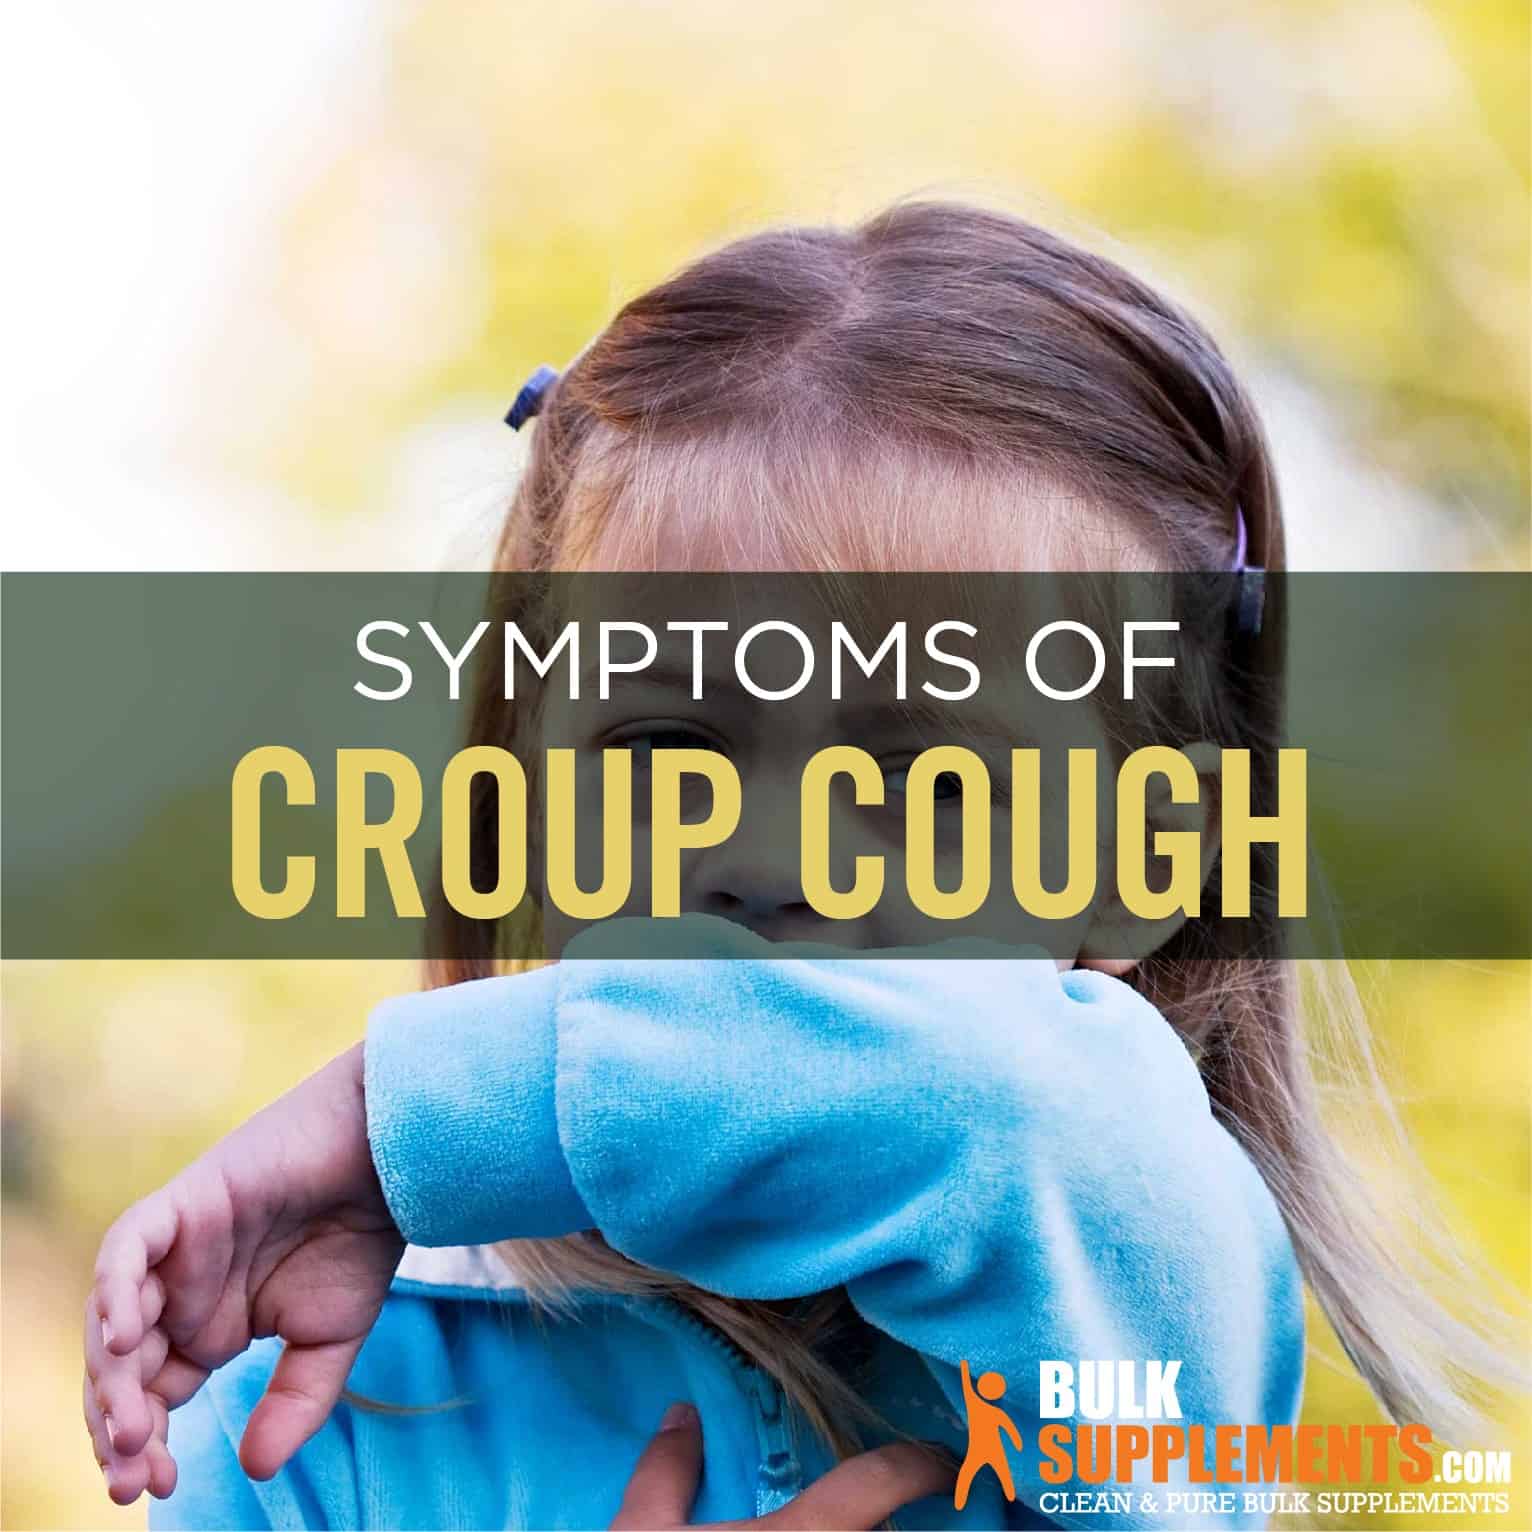 What Is Croup Cough Causes Symptoms Treatment